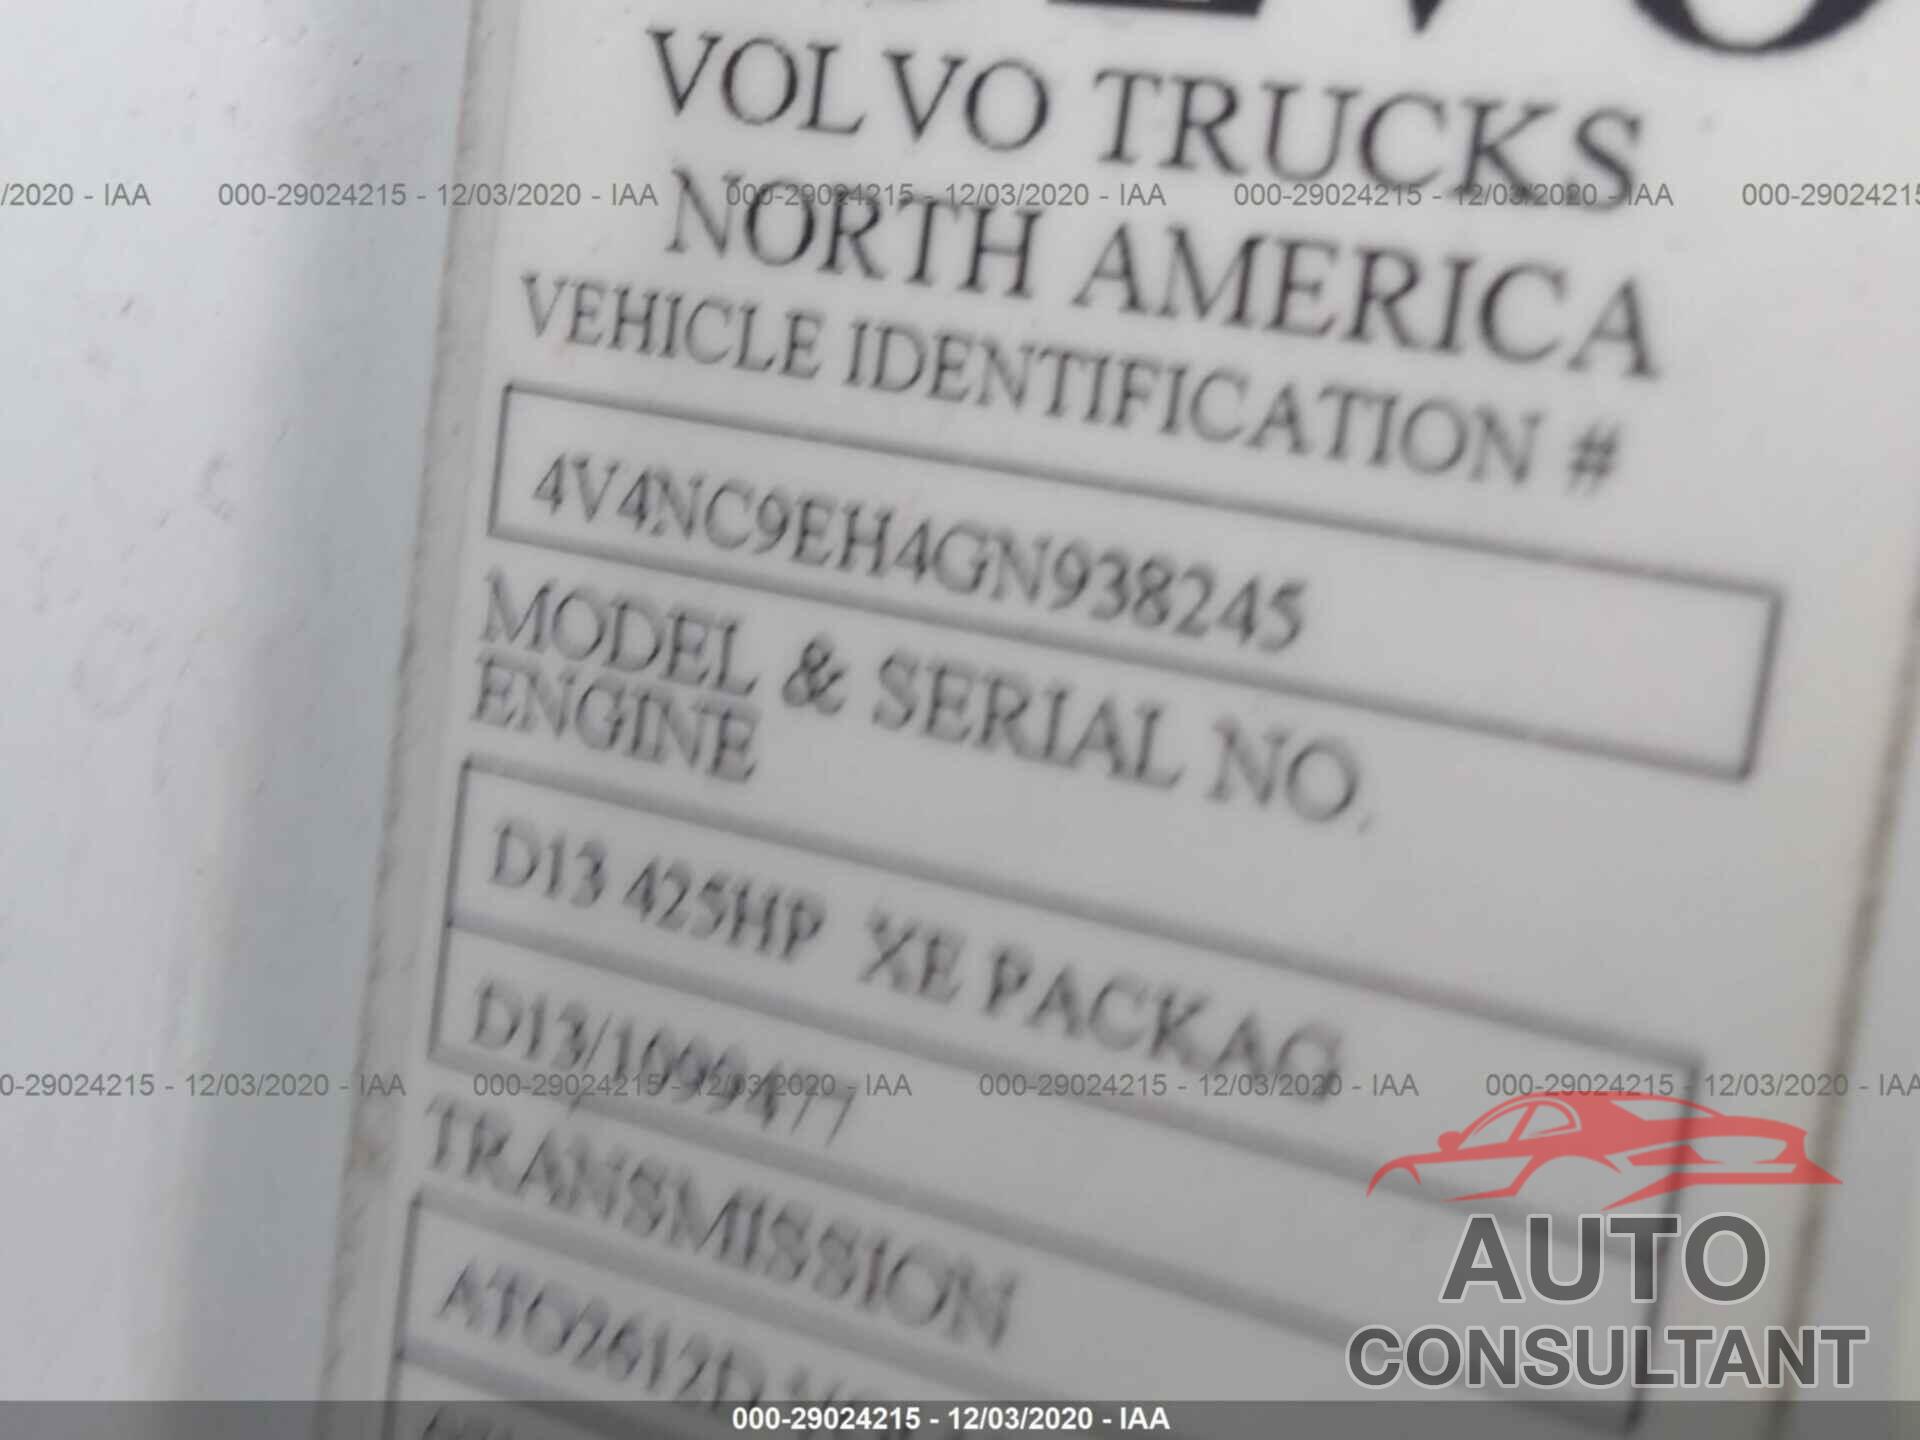 VOLVO VN 2016 - 4V4NC9EH4GN938245